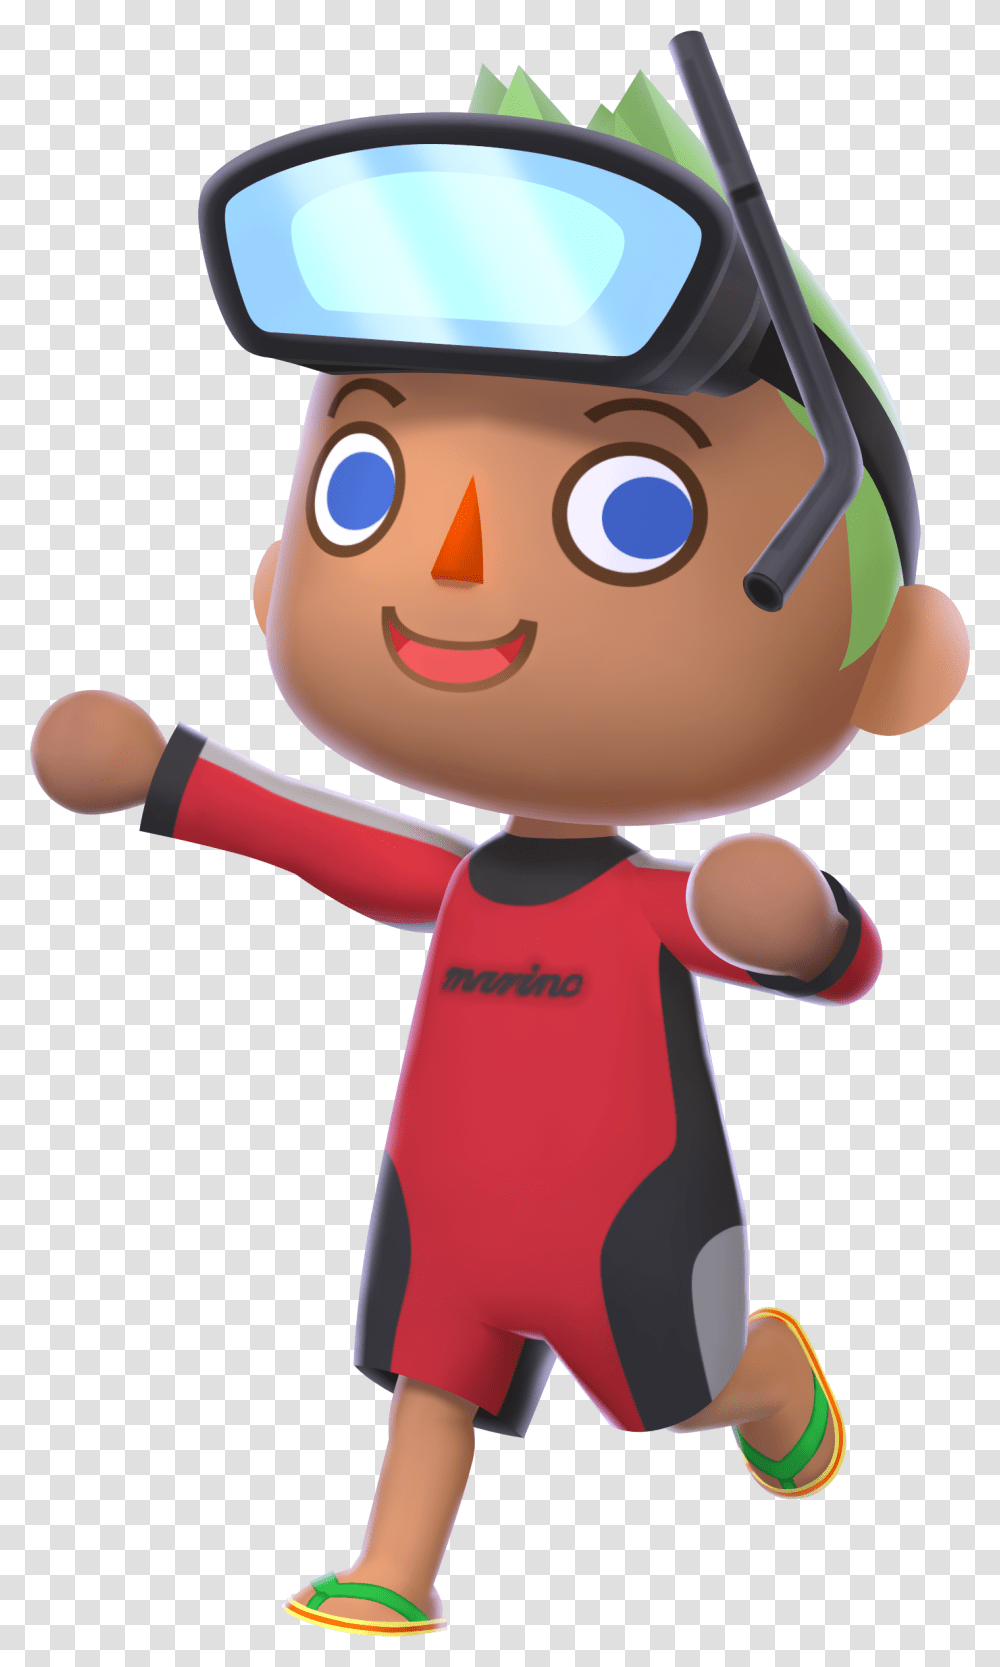 Image Boy Nintendo Animal Crossing 3ds Villager, Toy, Head, Mascot, Sweets Transparent Png